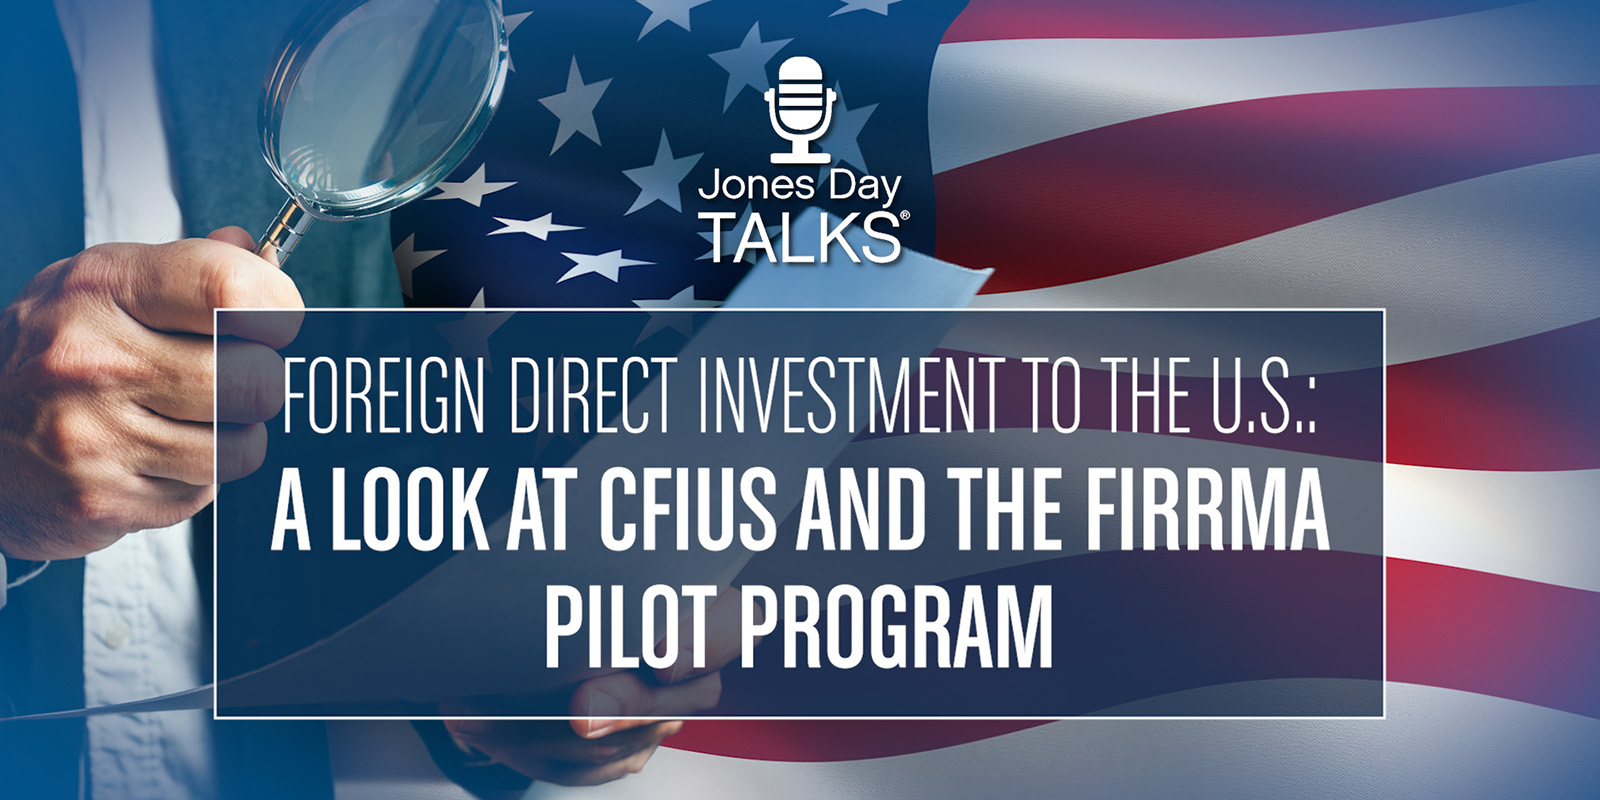 A Look at CFIUS and the FIRRMA Pilot Program